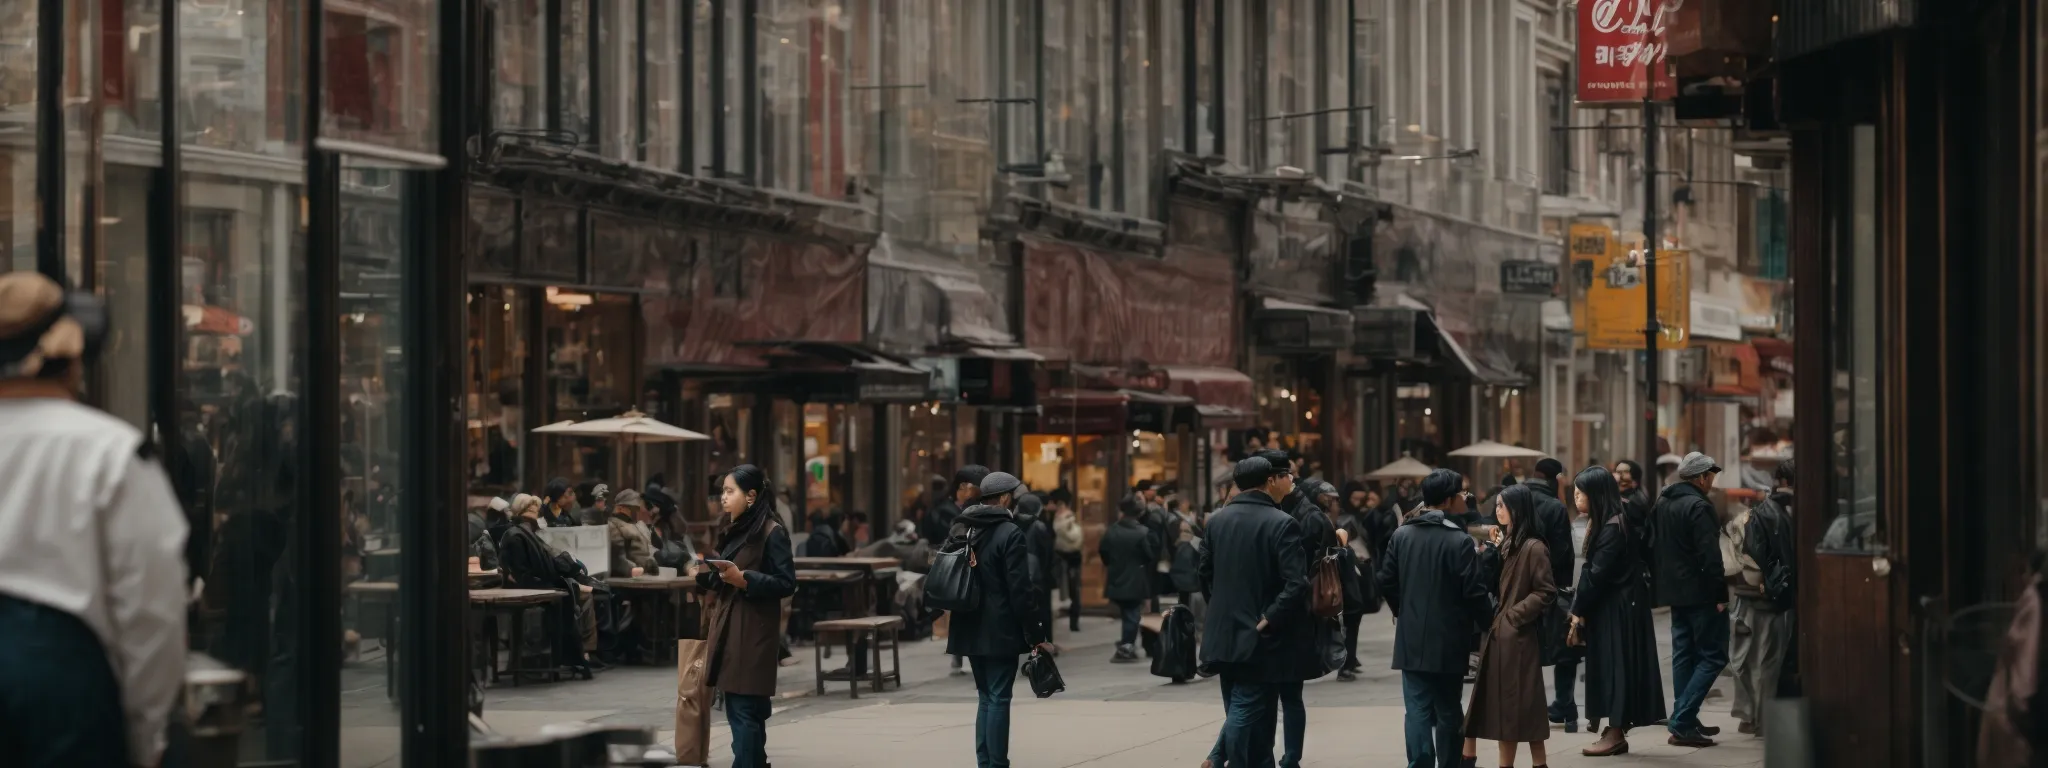 a bustling urban street scene with diverse storefronts and a focused individual interacting with a mobile device.